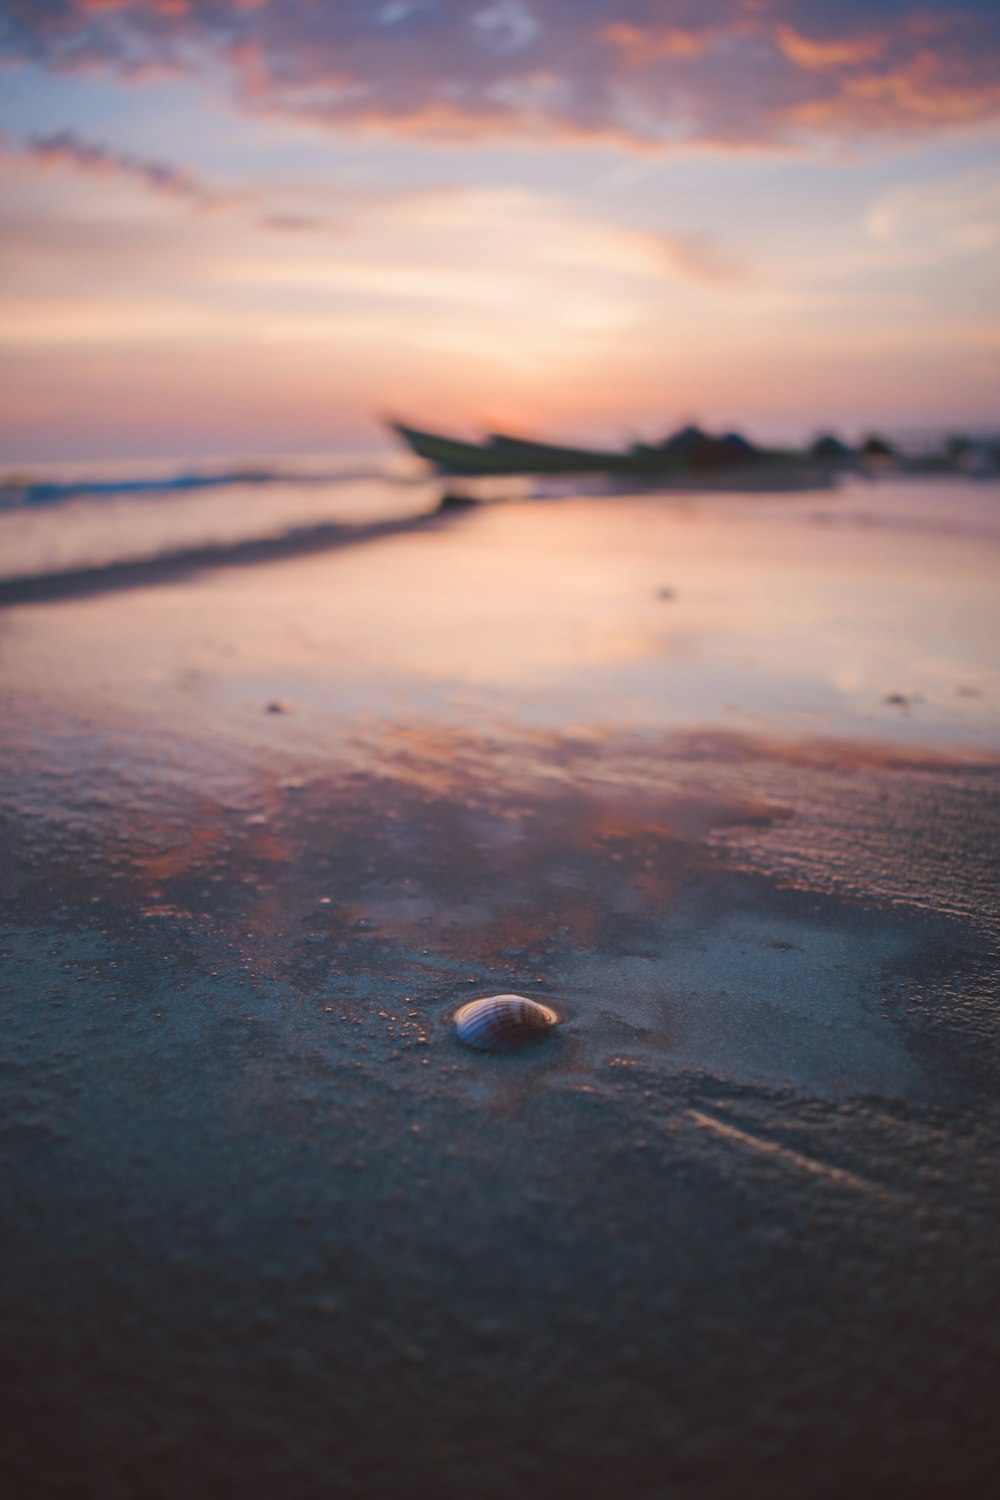 sea shell on beach shore during sunset